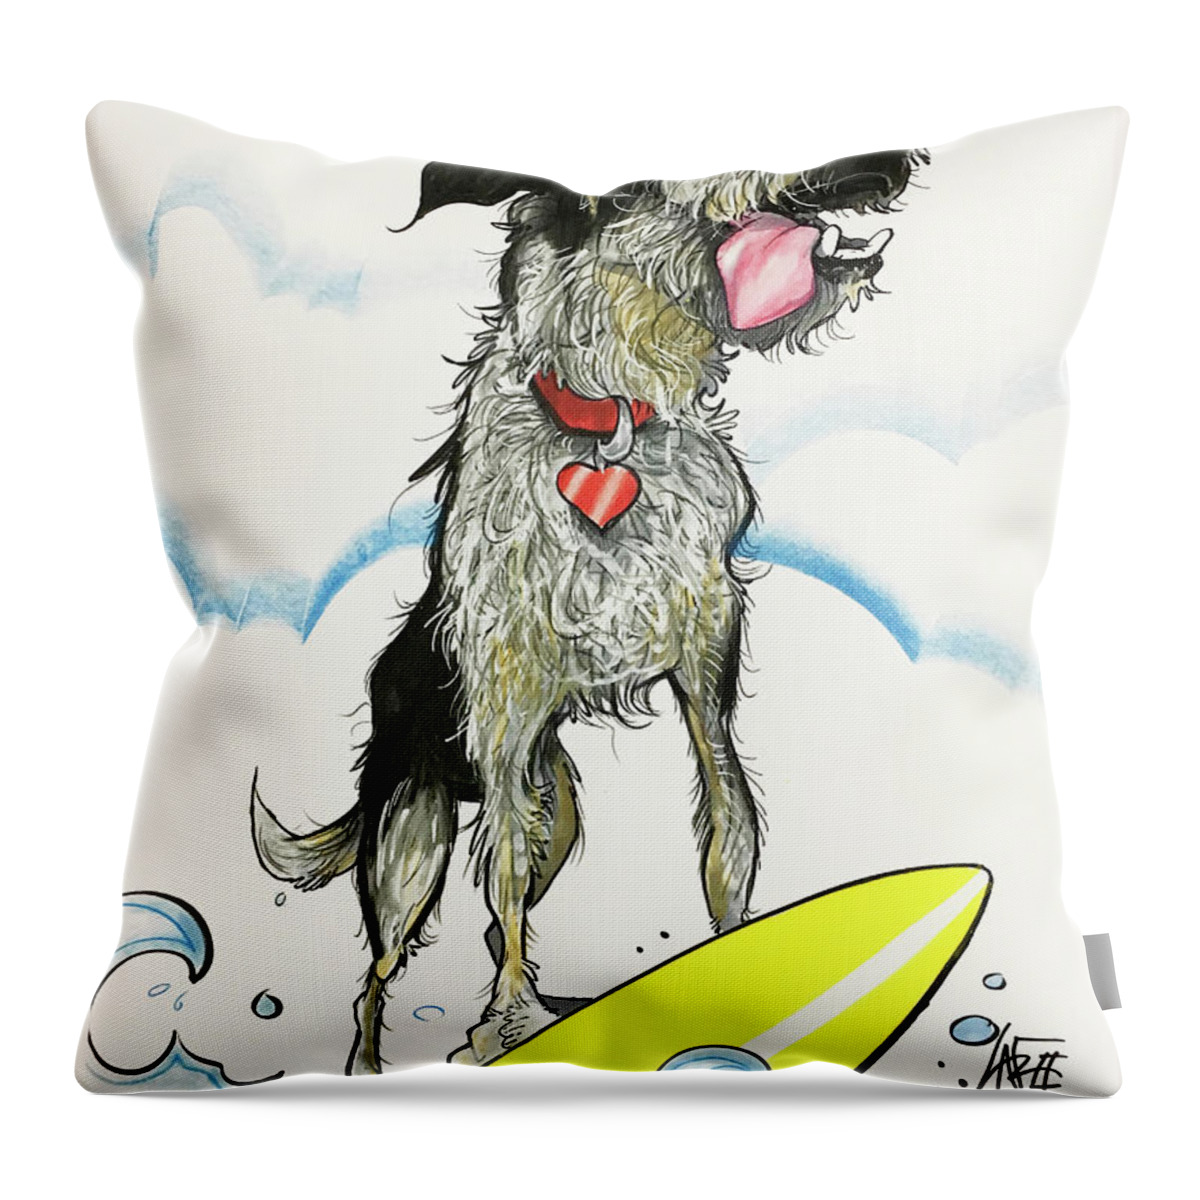 Engels 2639 Throw Pillow featuring the drawing Engels 2639 by John LaFree